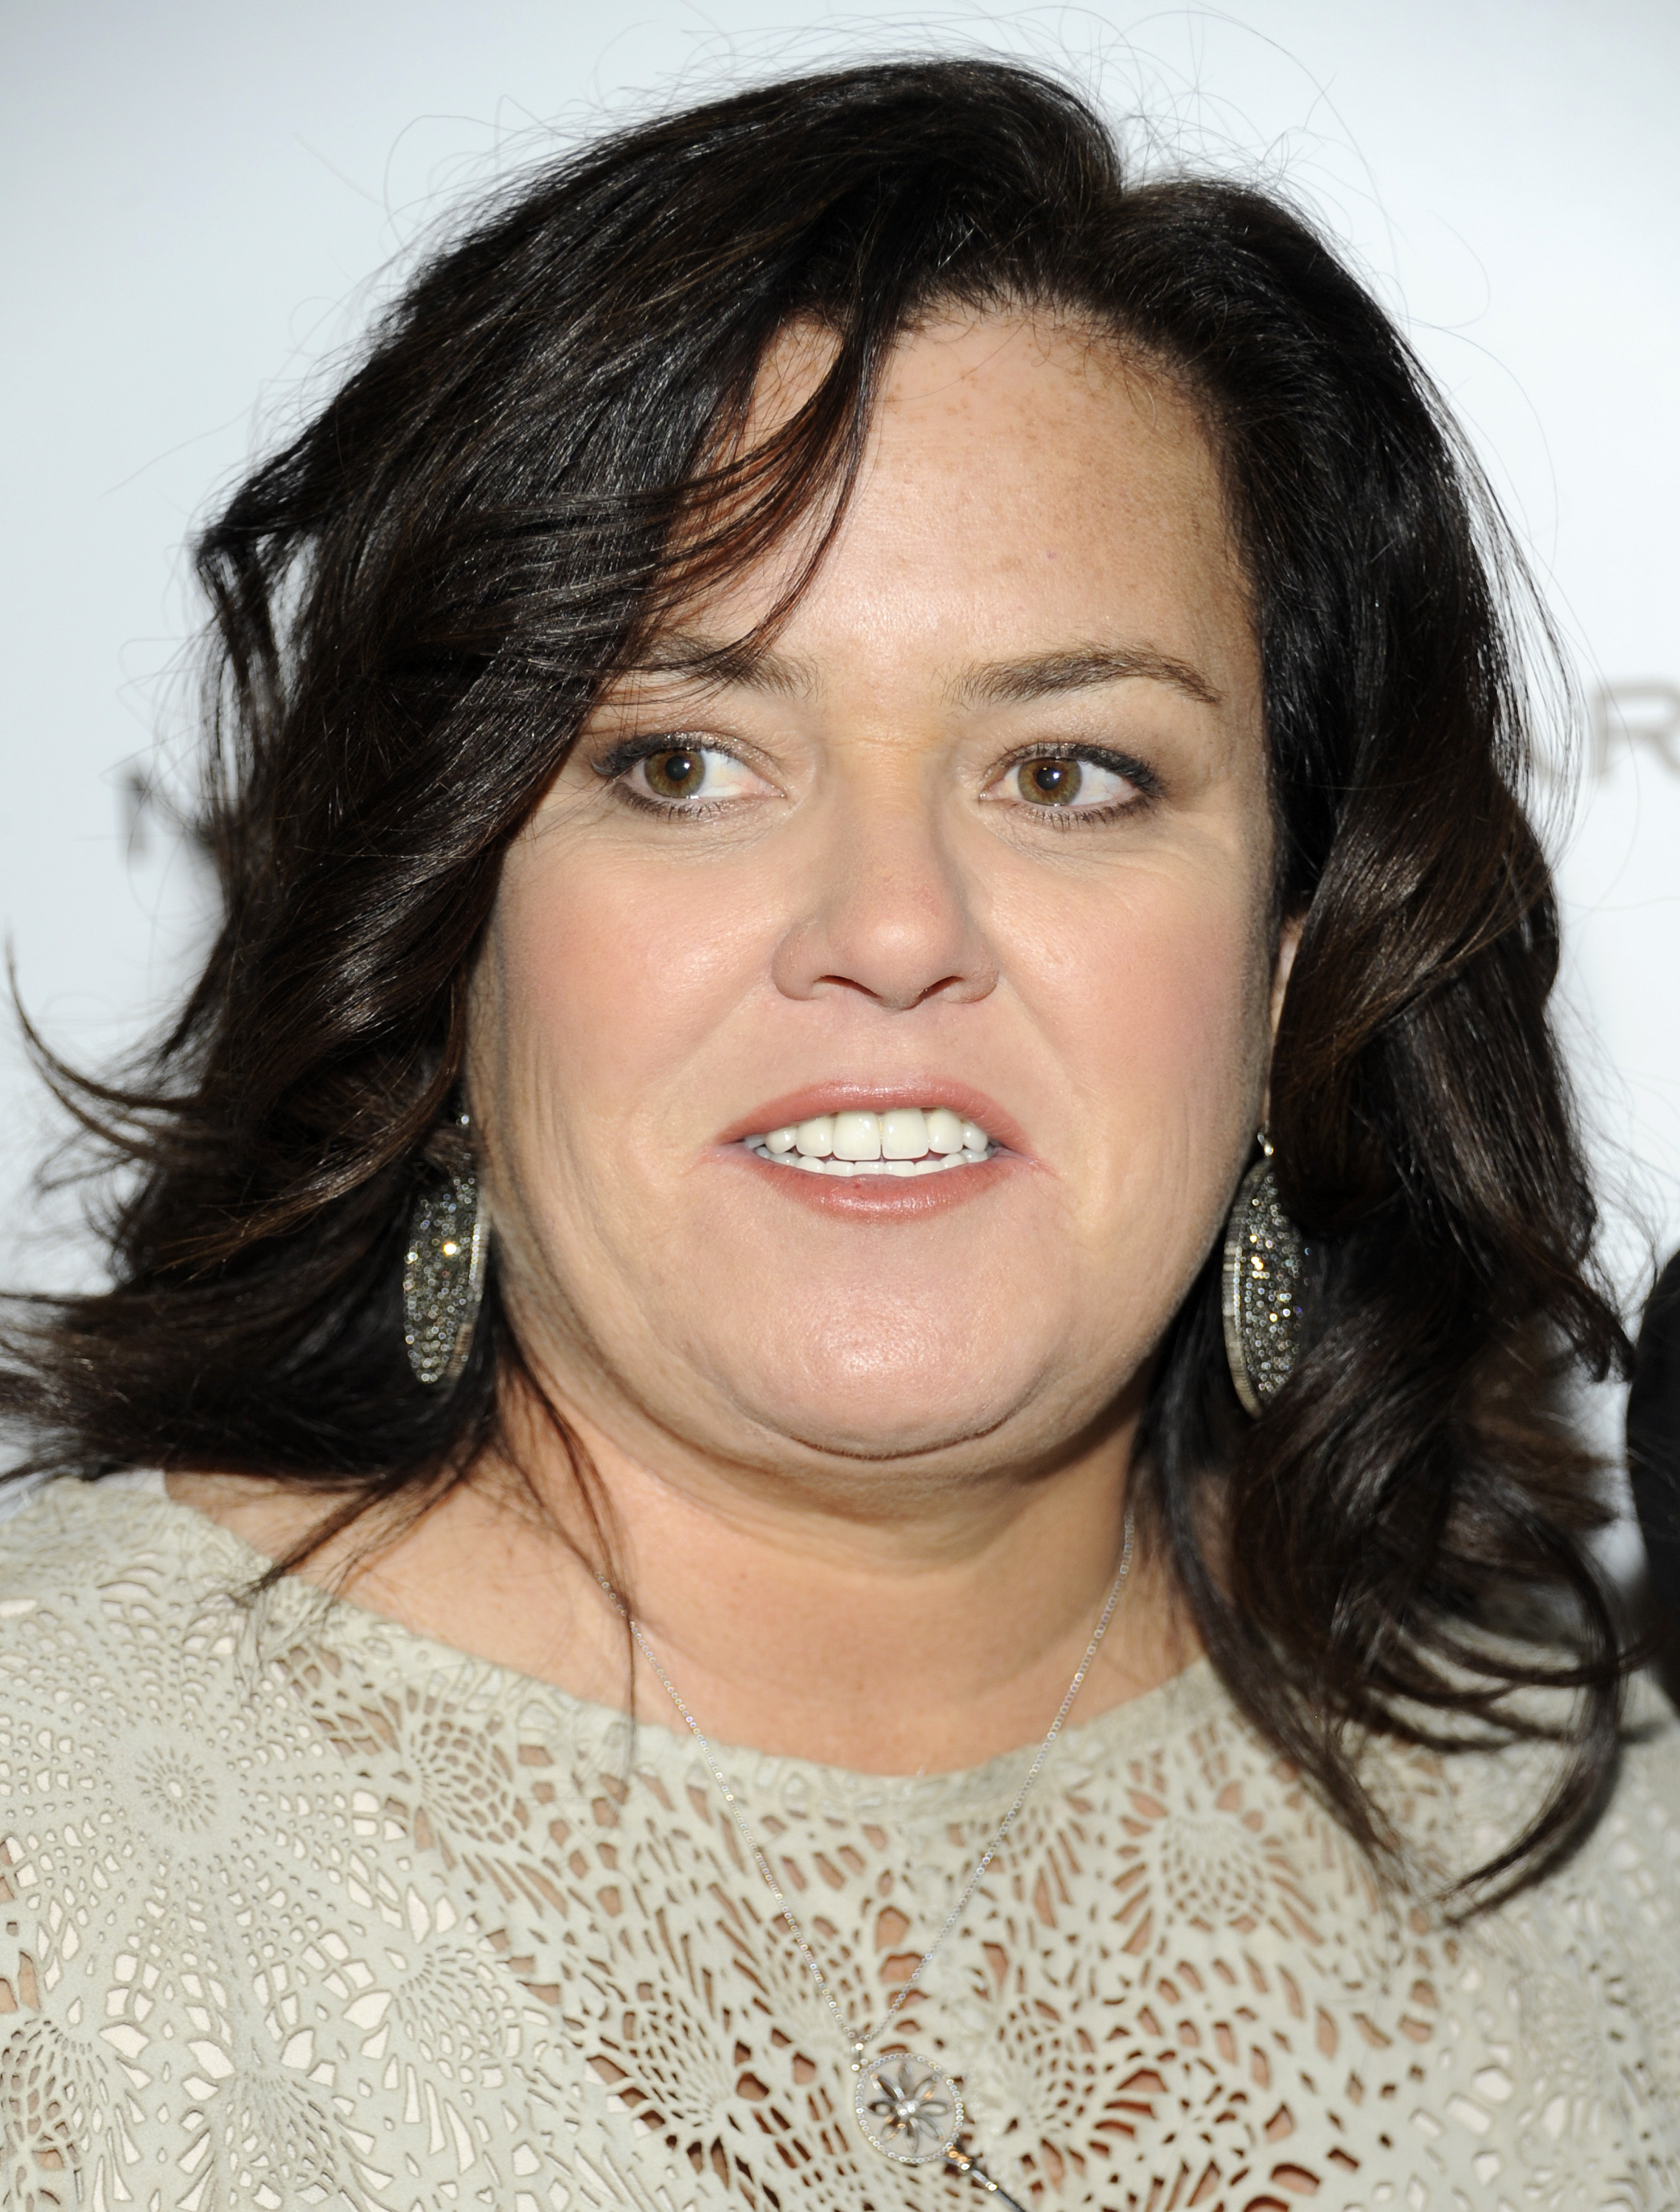 rosie-o-donnell-pictures